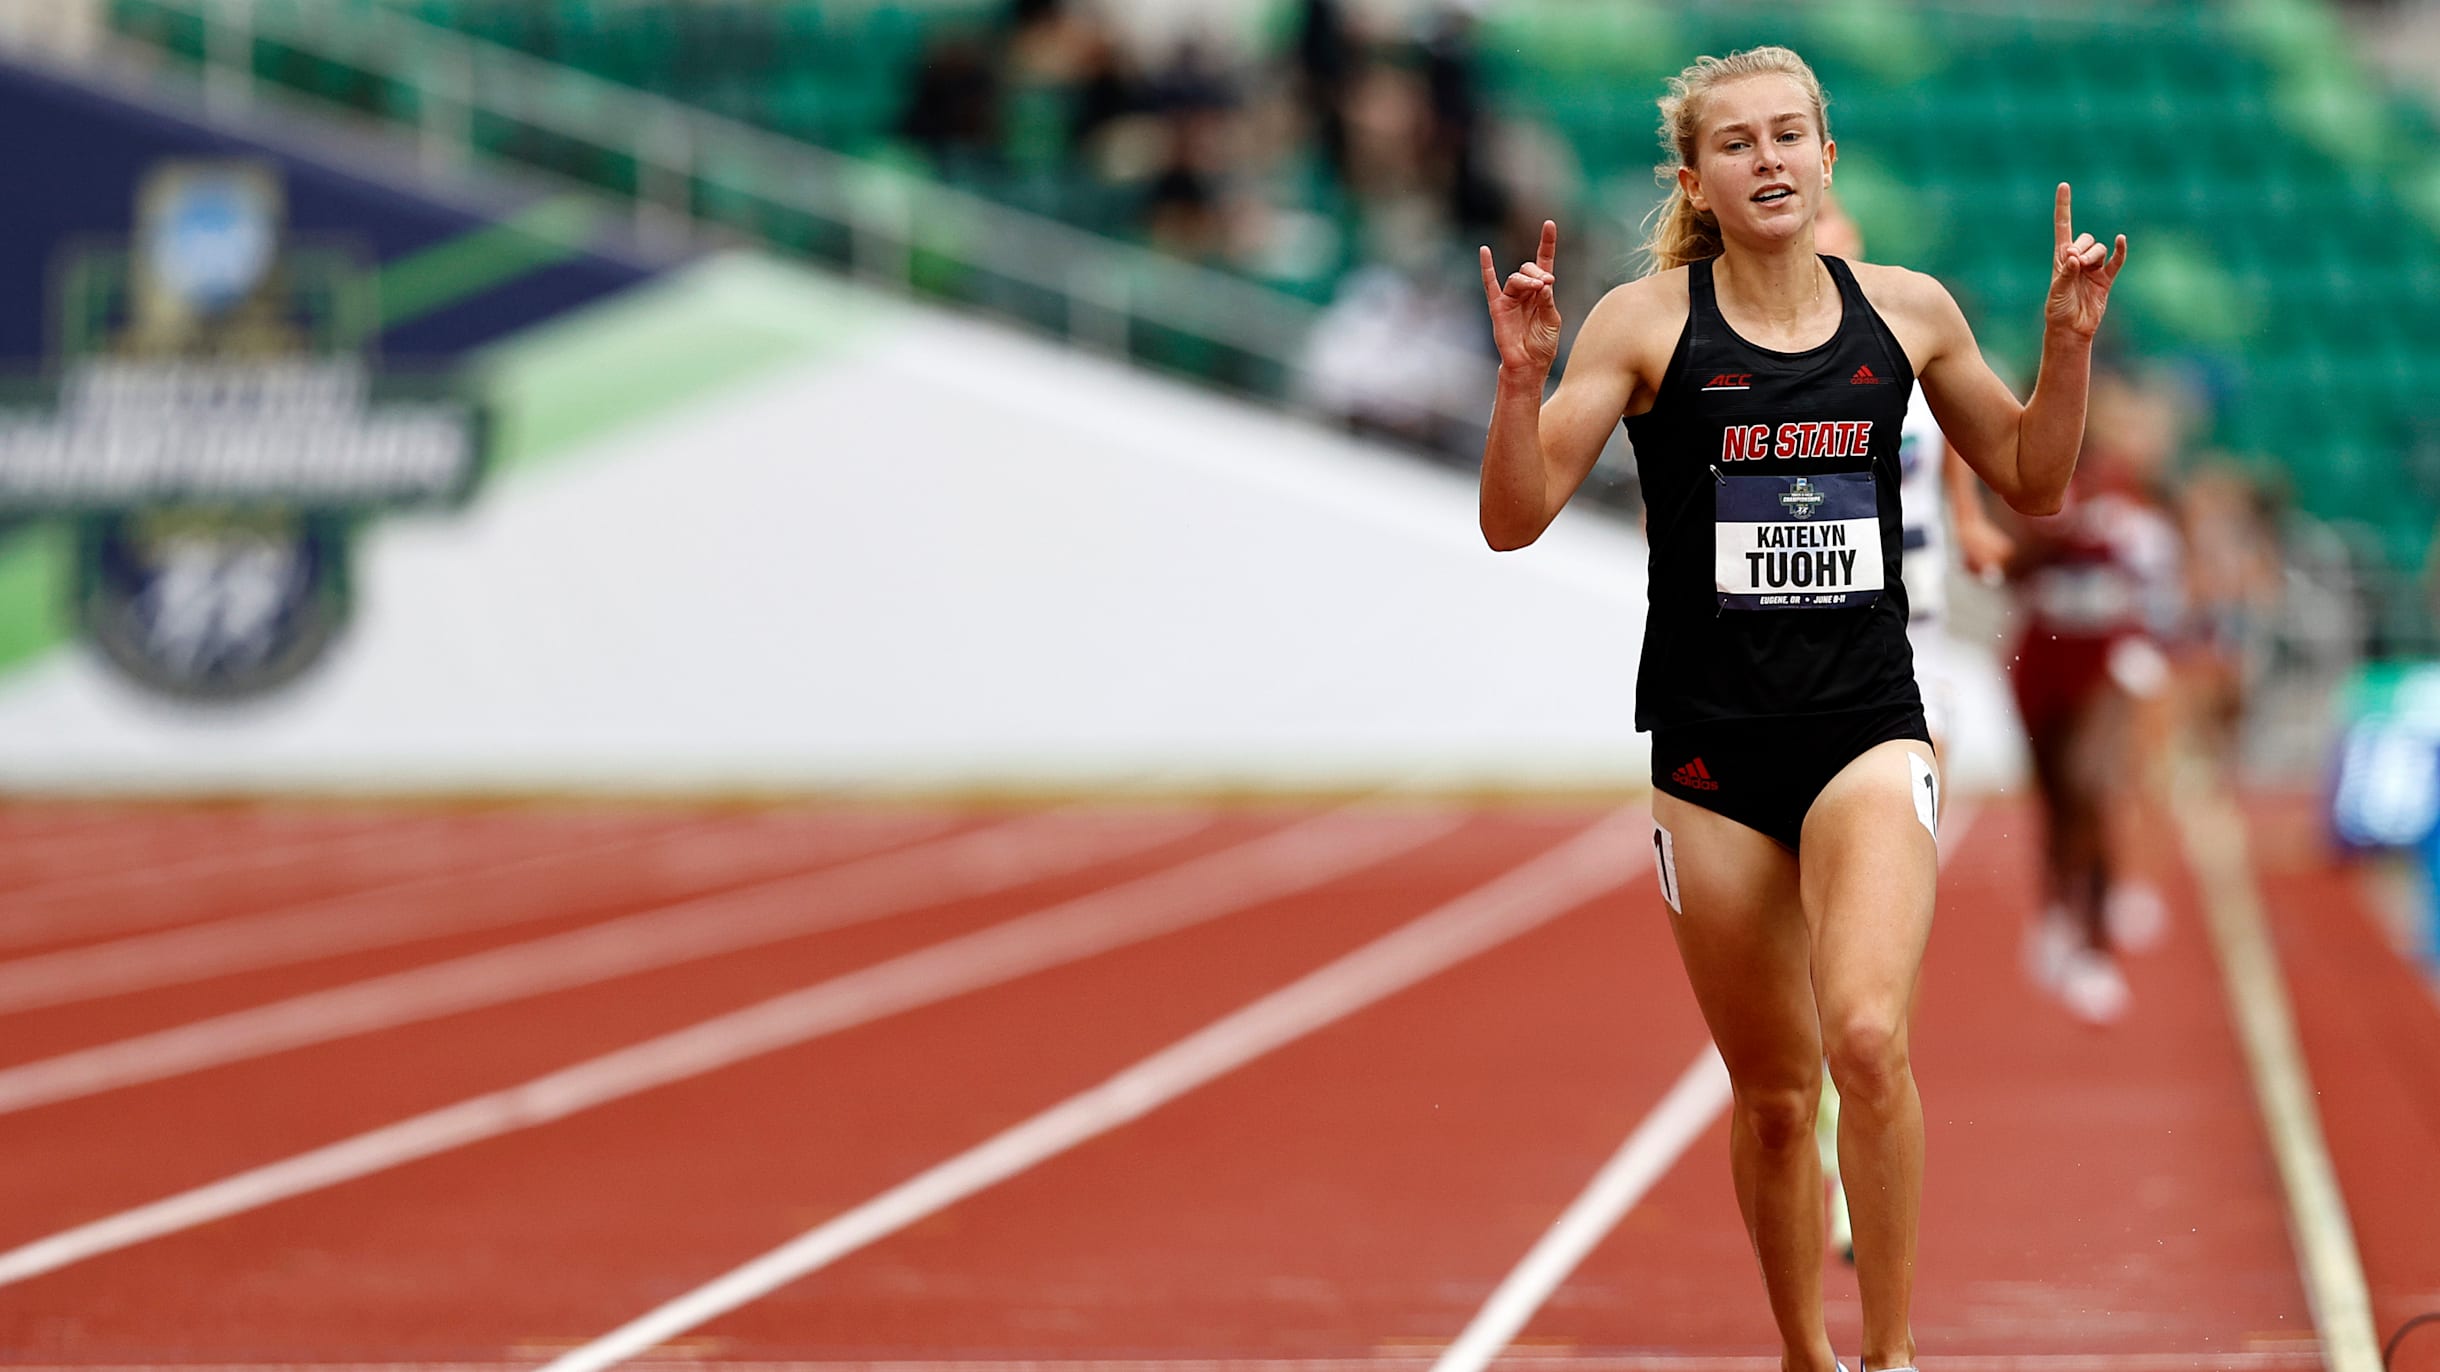 Five NCAA track stars who could star at Paris 2024, featuring Julien  Alfred, Terrence Jones and Katelyn Tuohy